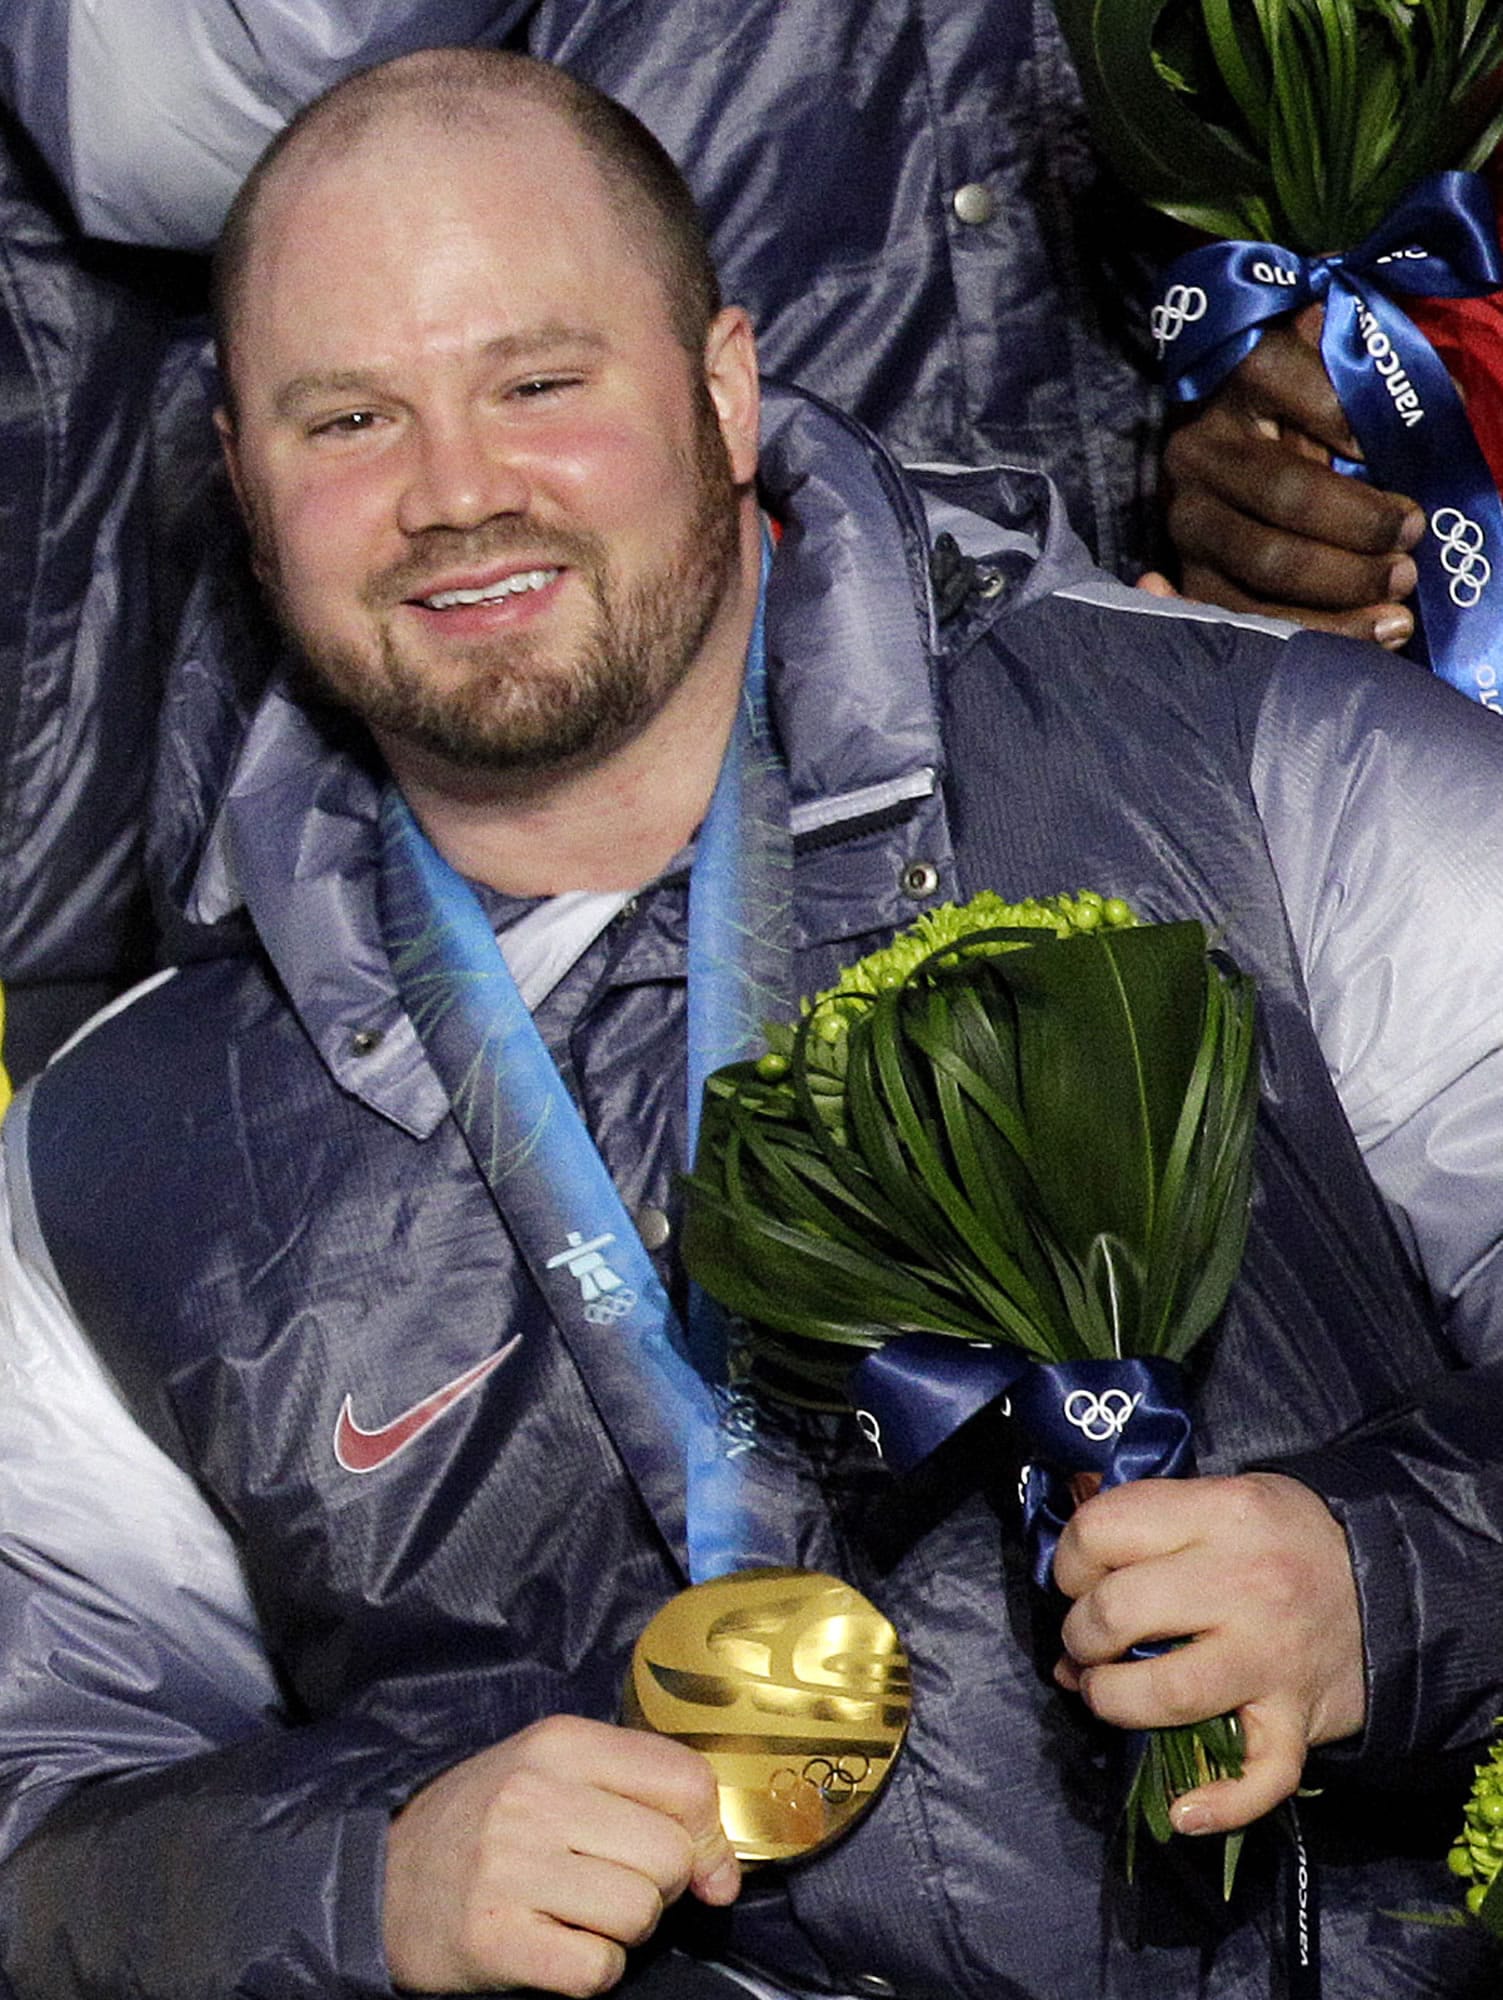 Steven Holcomb poses with his gold medal in the men's four-man bobsled during the medal ceremony at the Vancouver 2010 Olympics in Whistler, British Columbia. Holcomb, the longtime U.S. bobsledding star who drove to three Olympic medals after beating a disease that nearly robbed him of his eyesight, was found dead in Lake Placid, N.Y., on Saturday, May 6, 2017. He was 37.